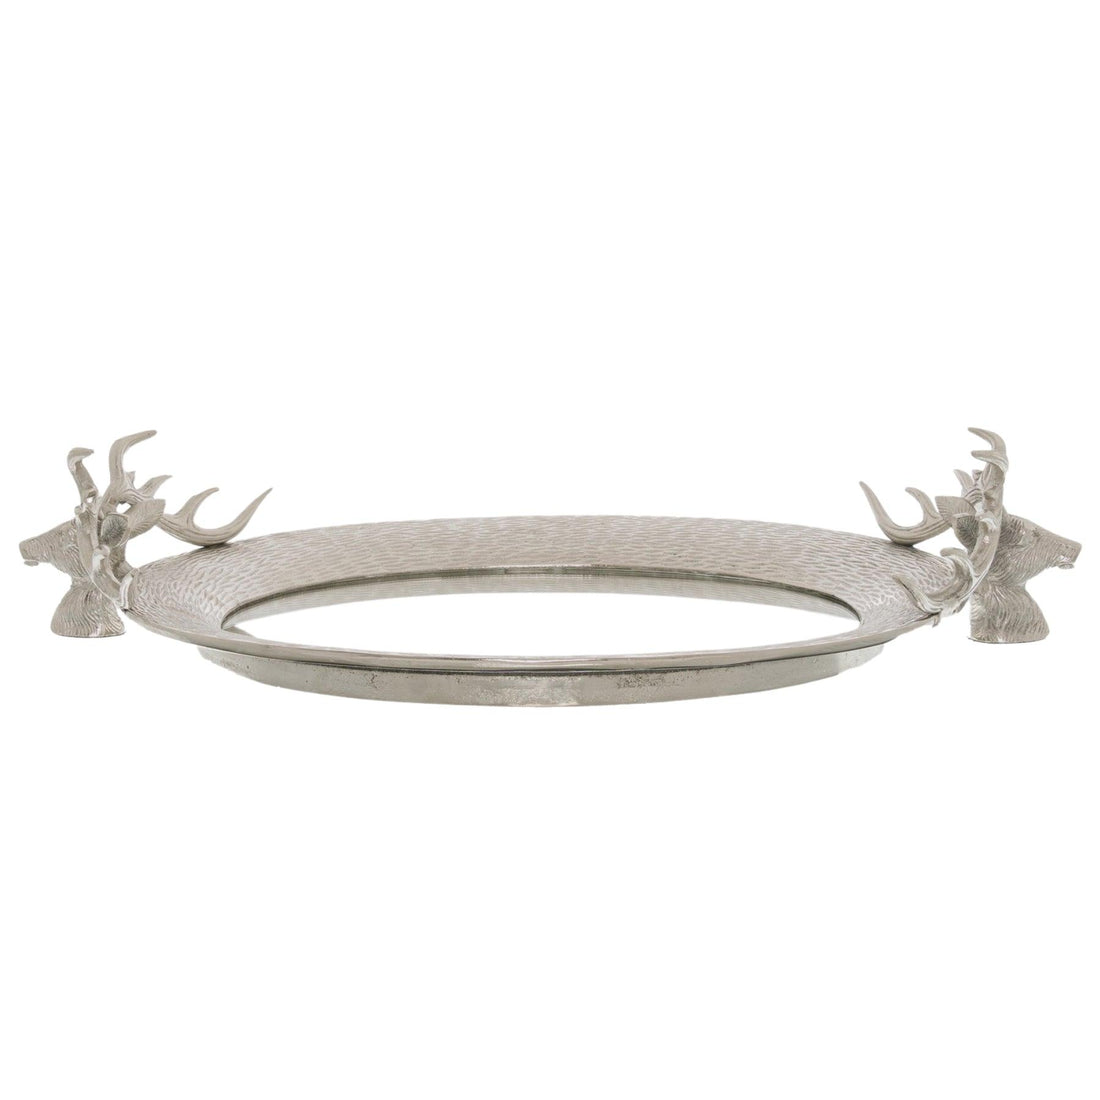 Large Mirrored Tray With Stag Heads - £159.95 - Gifts & Accessories > Christmas Decorations > Christmas Room Decorations 